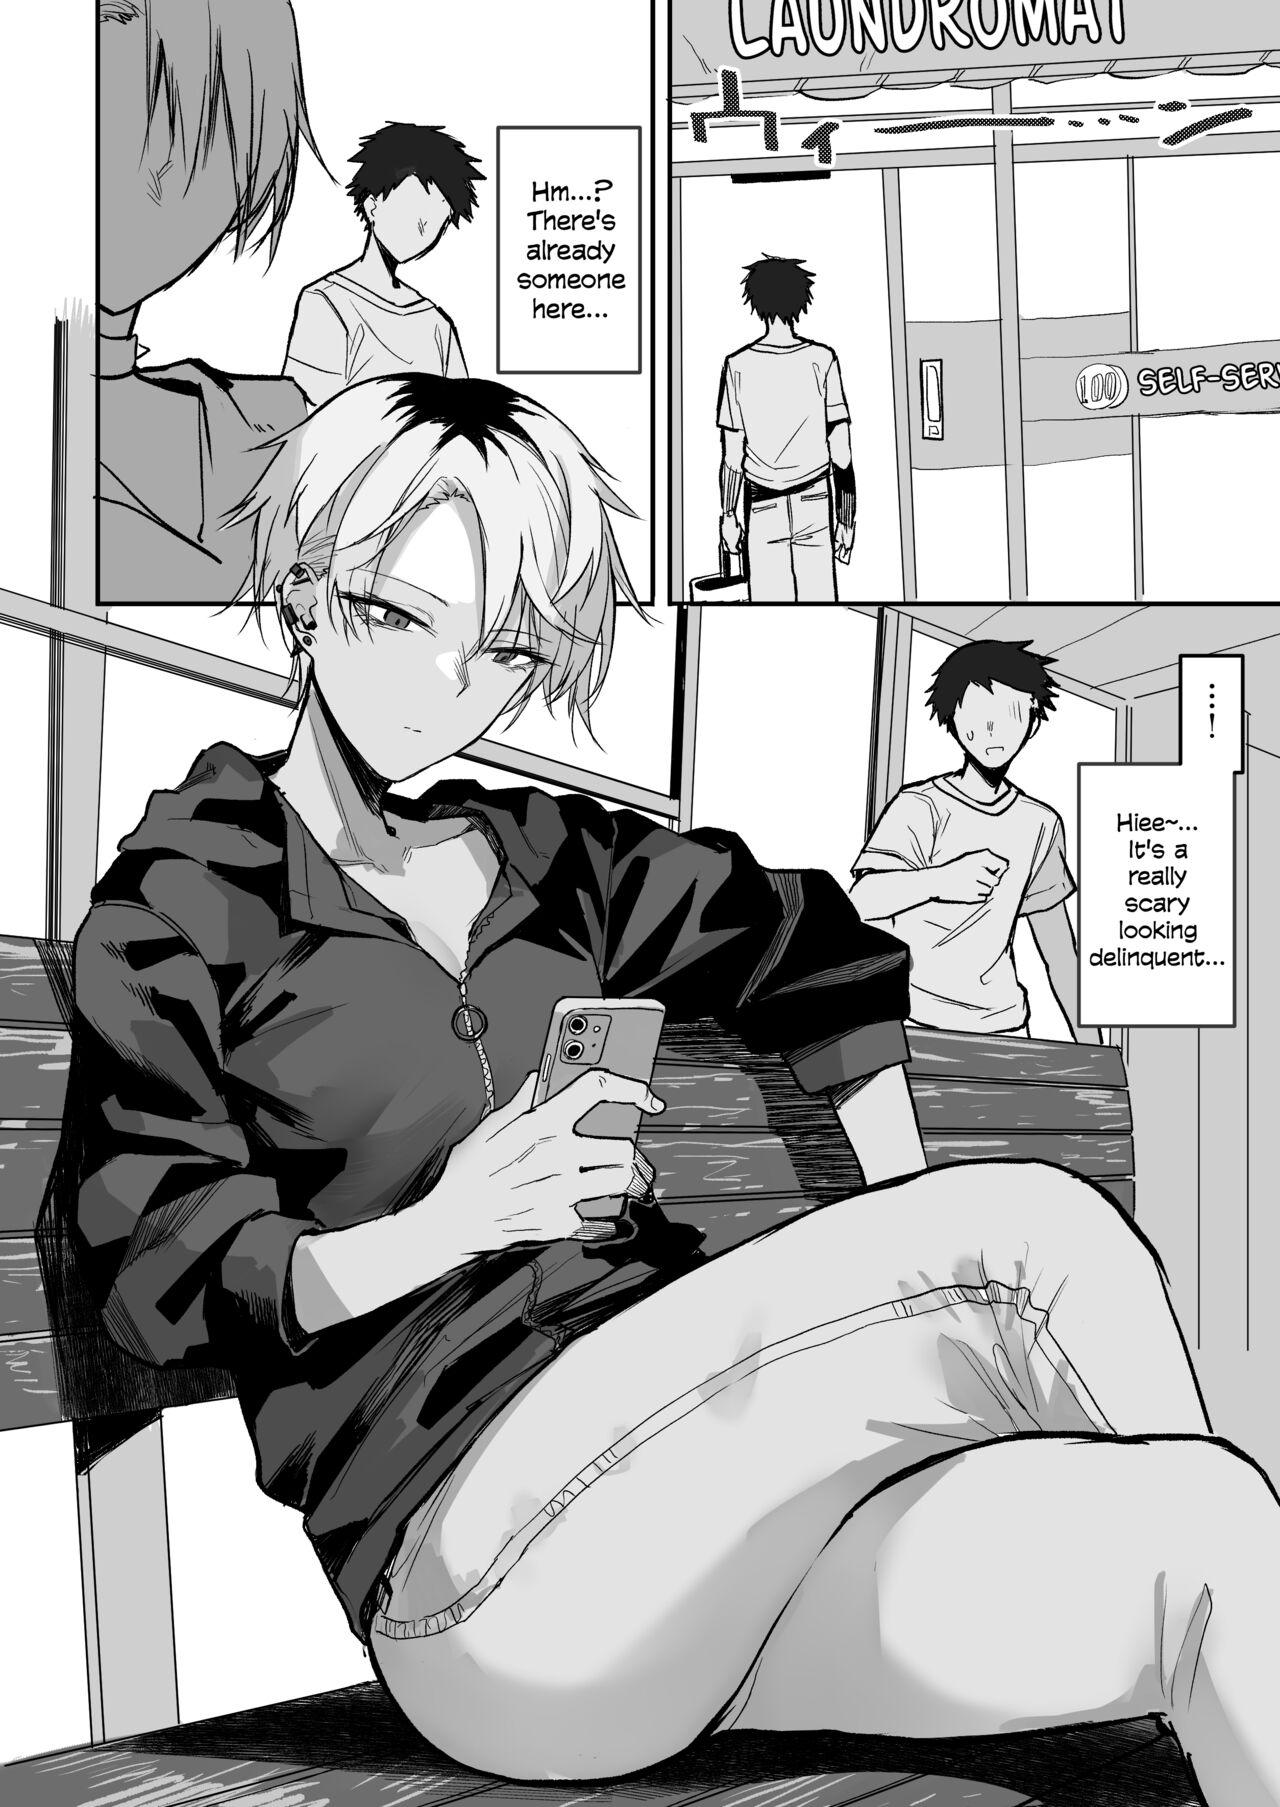 Erotic Coin Laundry de Kowai Yankee ni Karamareru Manga | A Manga About Getting Mixed Up With A Scary Delinquent At The Laundromat - Original Gorda - Page 1